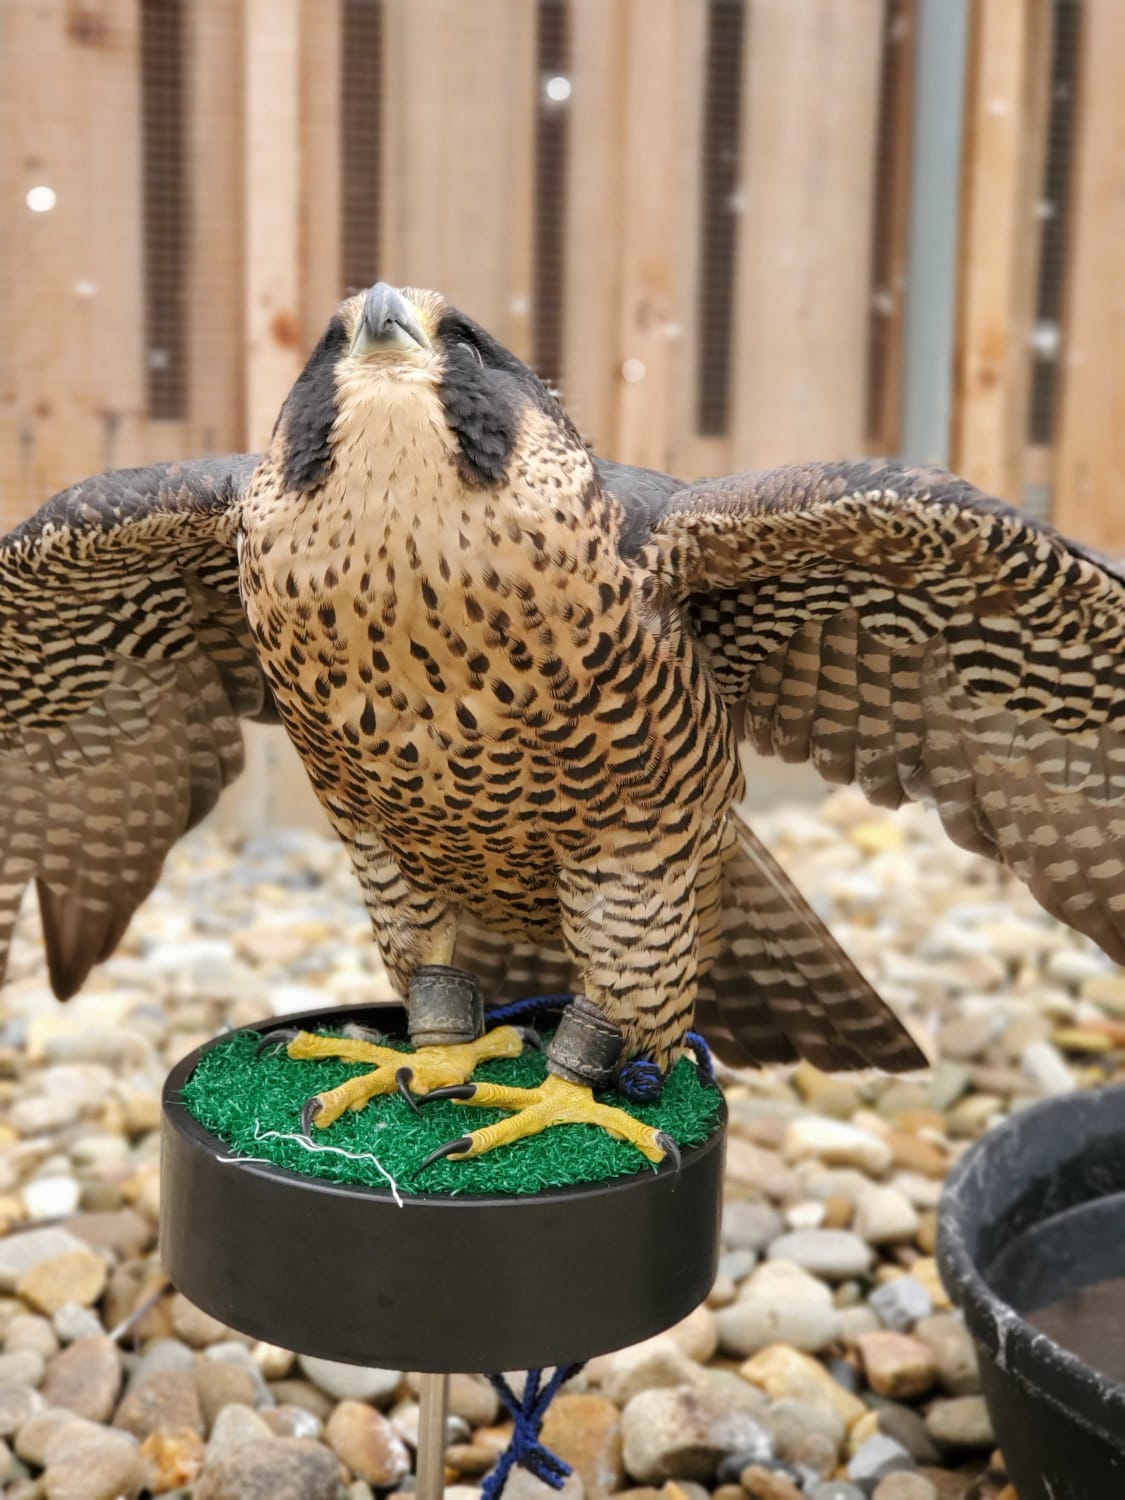 In the mid-to-late 1900's, Peregrine falcons nearly went extinct in North America due to the pesticide DDT. Long prized as a falconry bird, falconry techniques (and falconers) contributed to peregrine falcon conservation and helped their population recover!